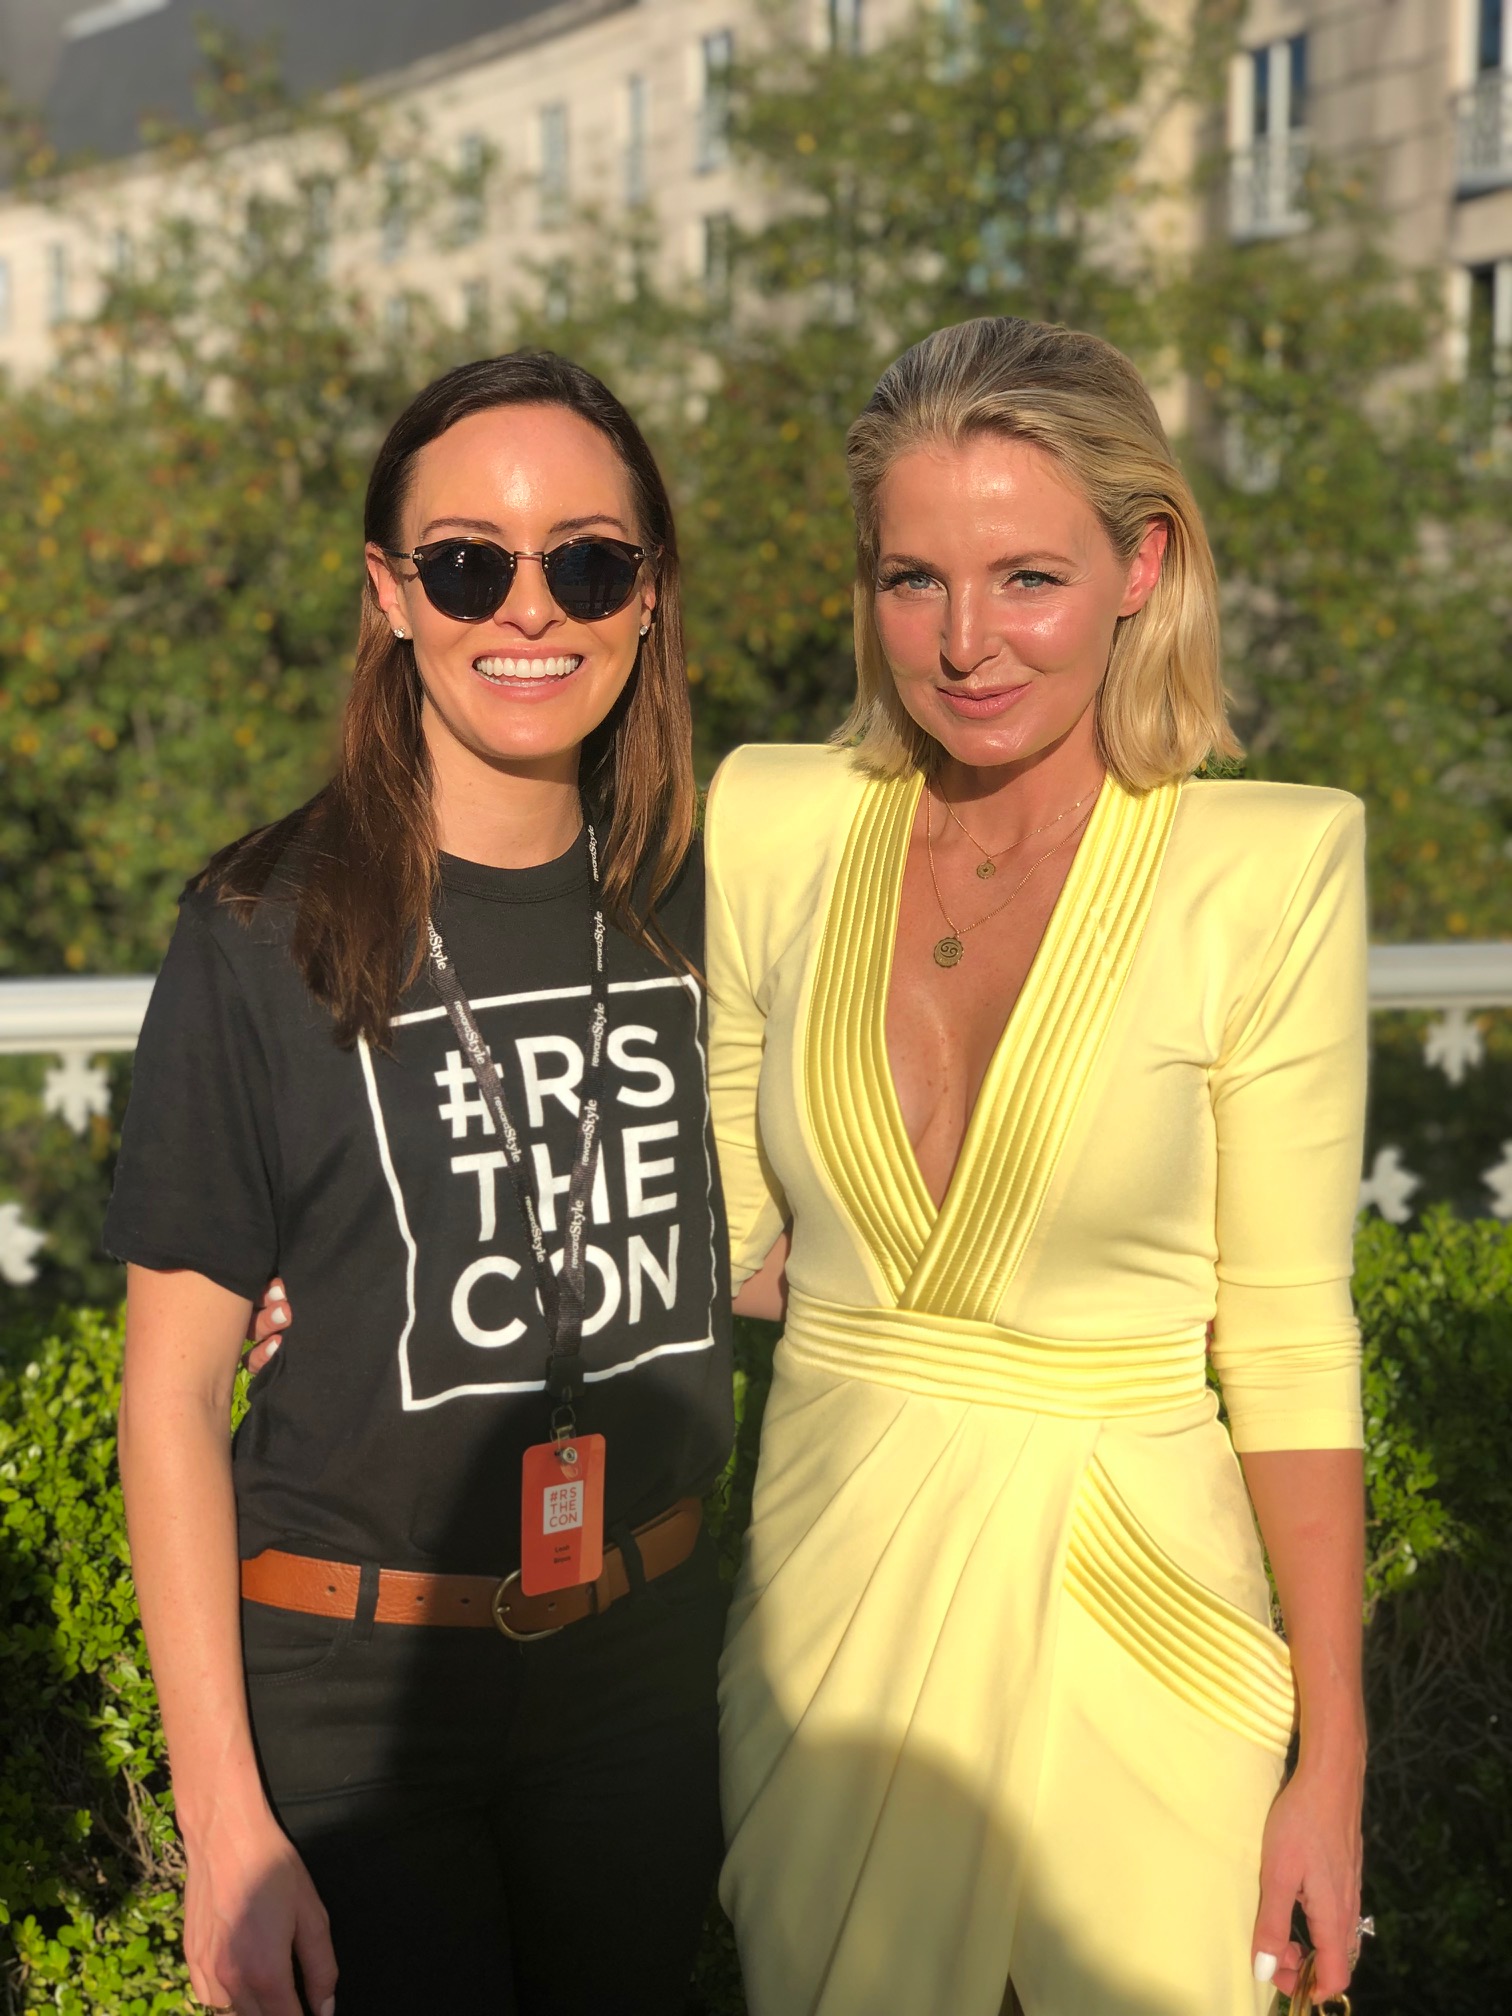 Reward Style Conference 2019, Fashion blogger Erin Busbee of BusbeeStyle.com with Leah, her rewardstyle rep, wearing a yellow Zhivago dress at a cocktail party in Dallas, Texas